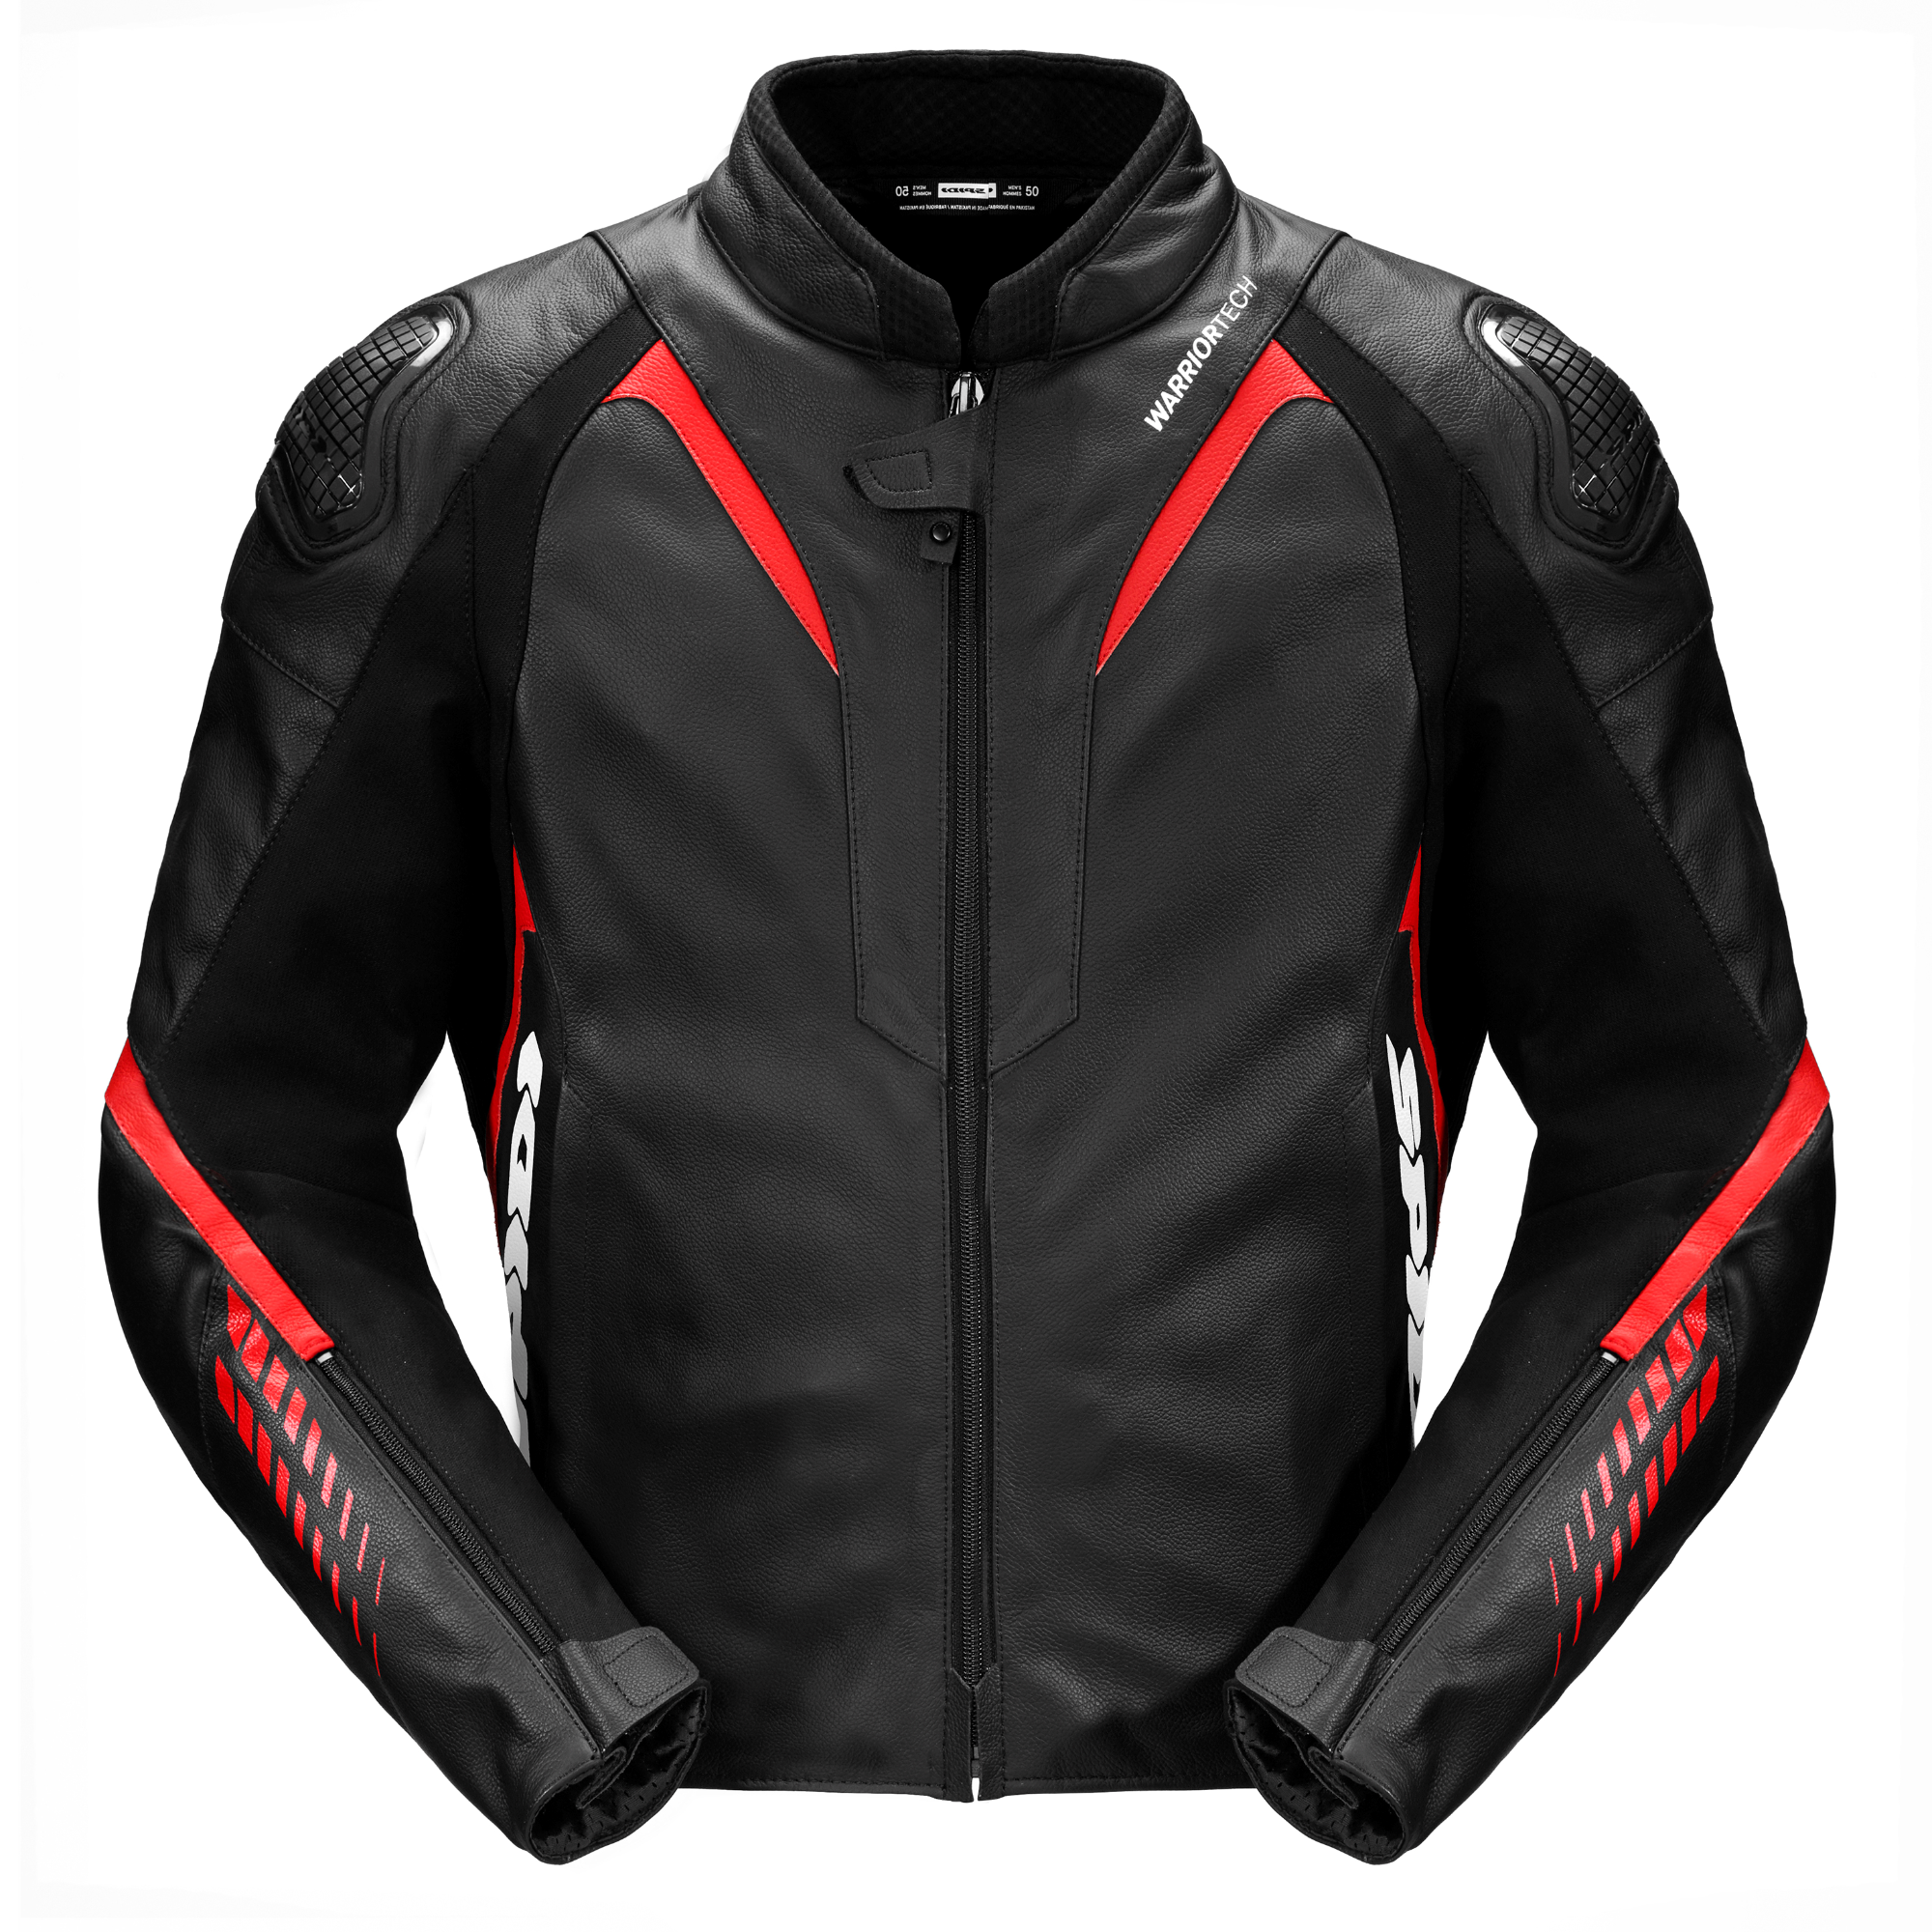 Image of Spidi Nkd-1 Jacket Red Size 54 ID 8030161461787